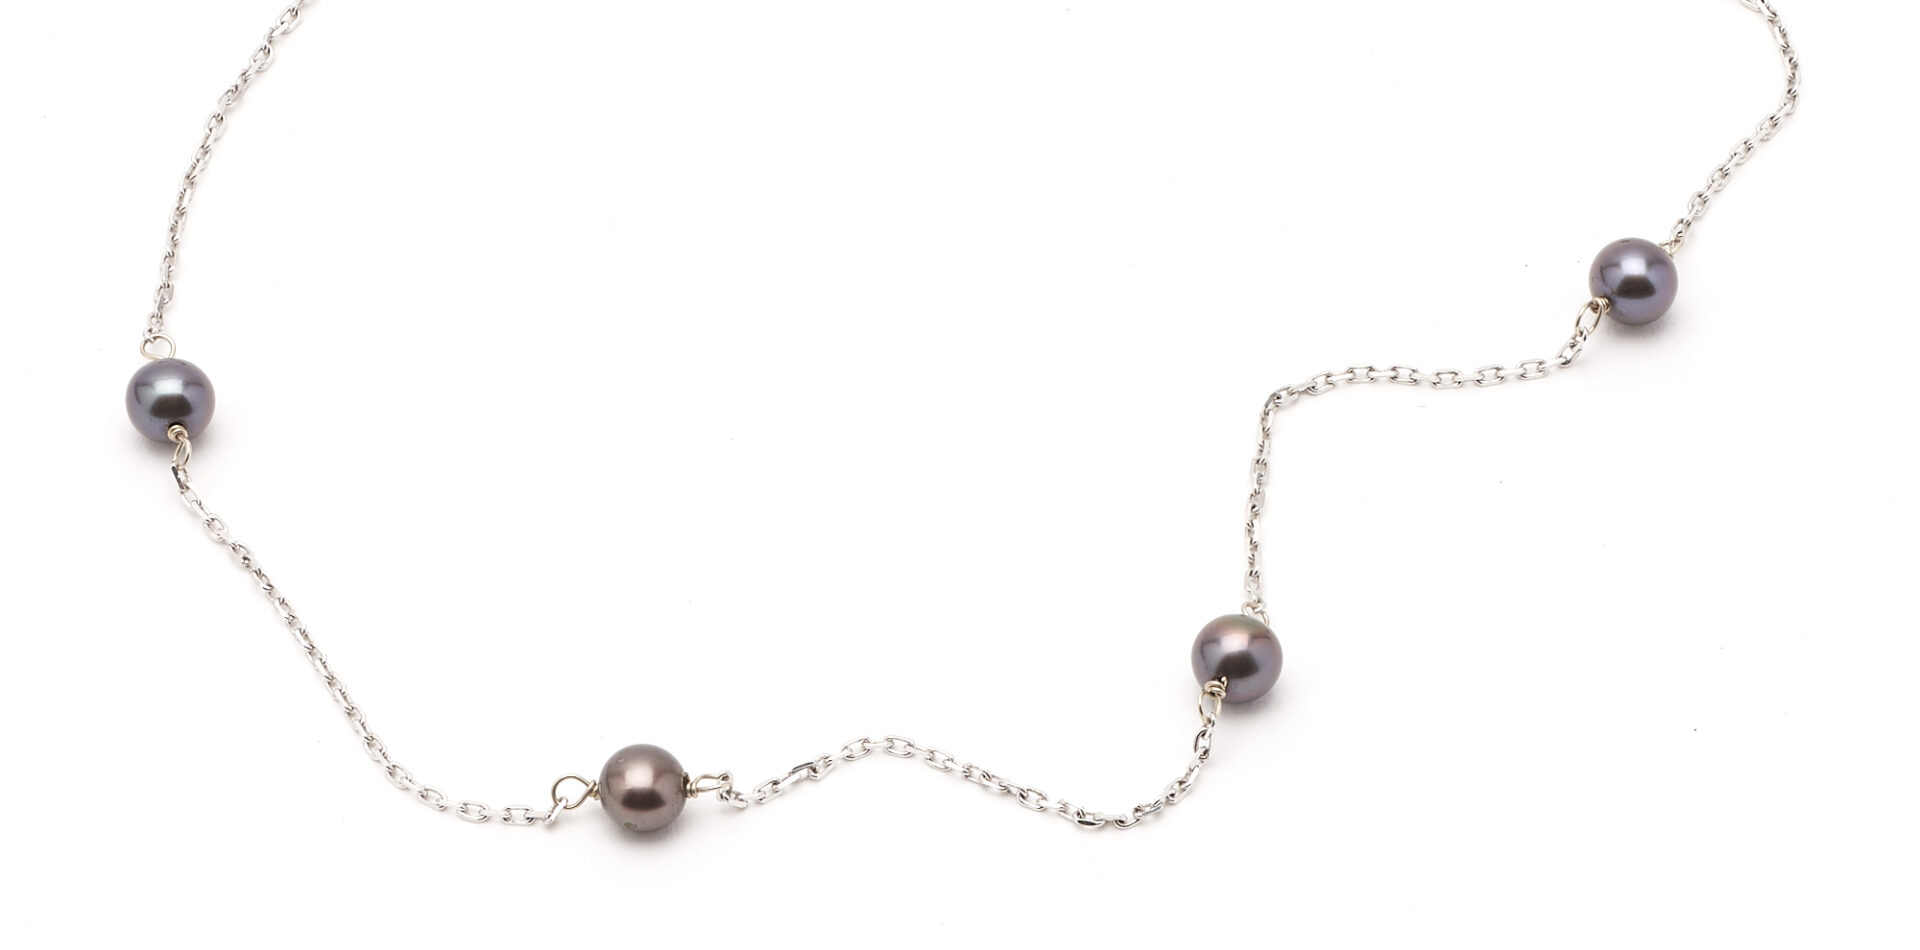 Lot 73: 3 Pearl Necklaces, incl. Mikimoto